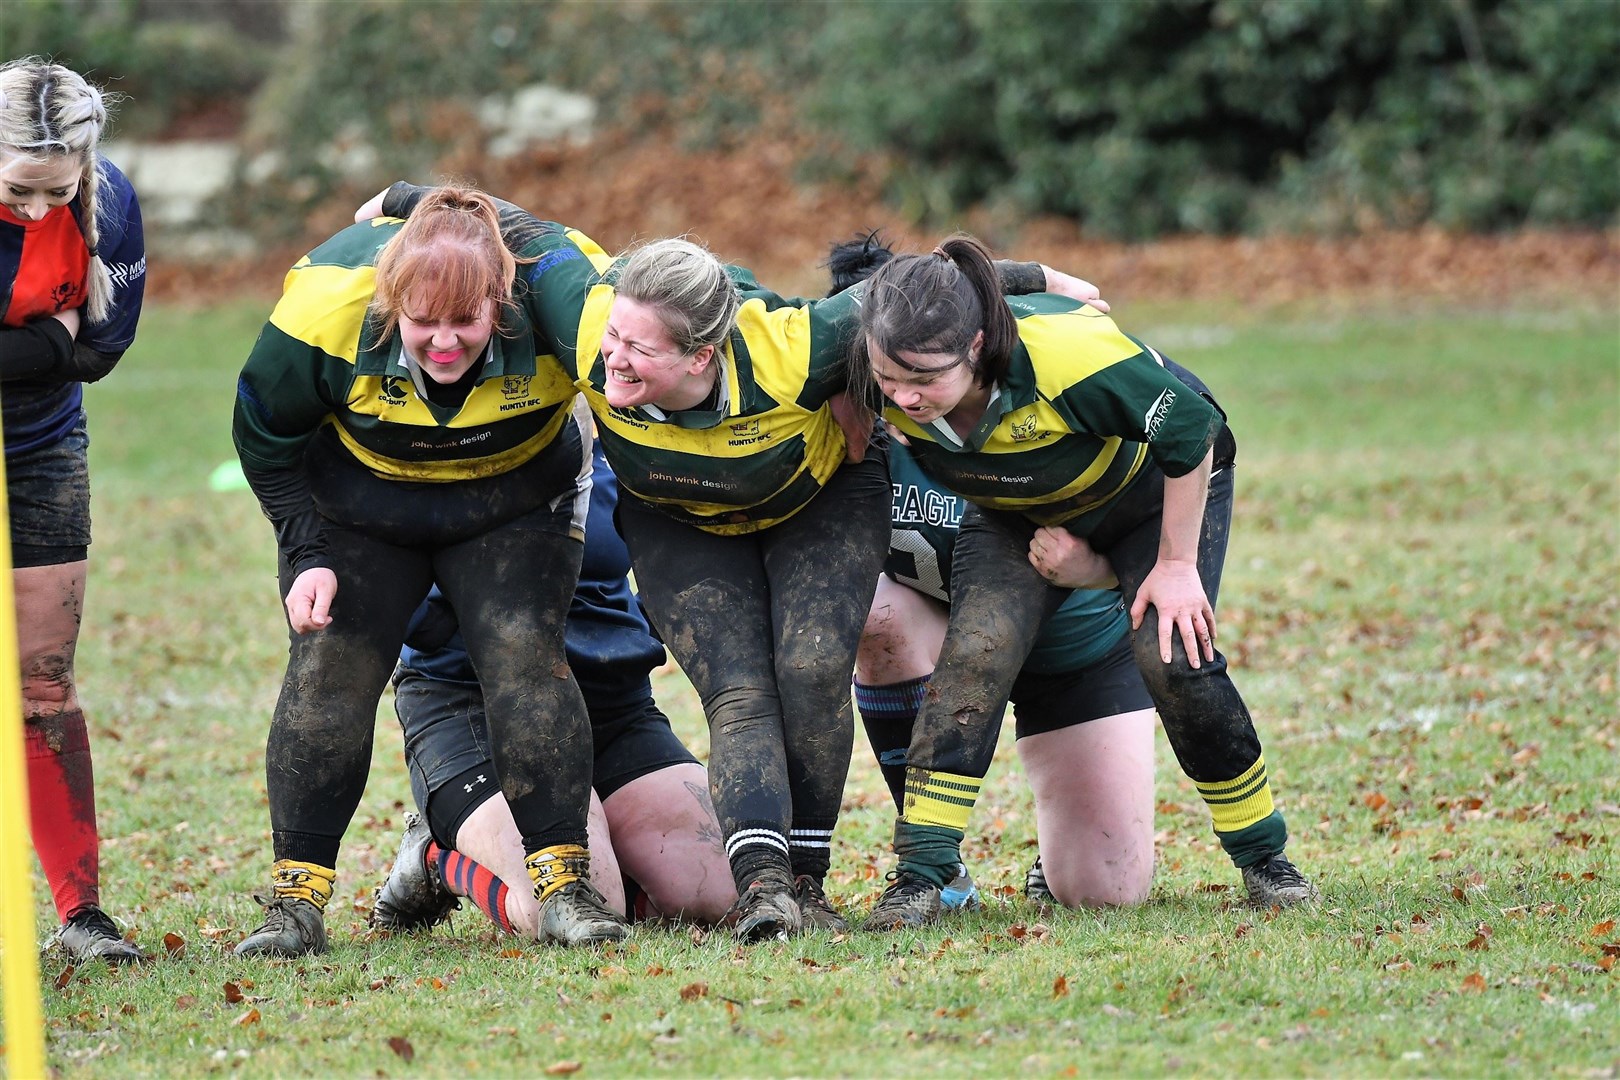 Moray RFC women's rugby development day. Photo: James Officer